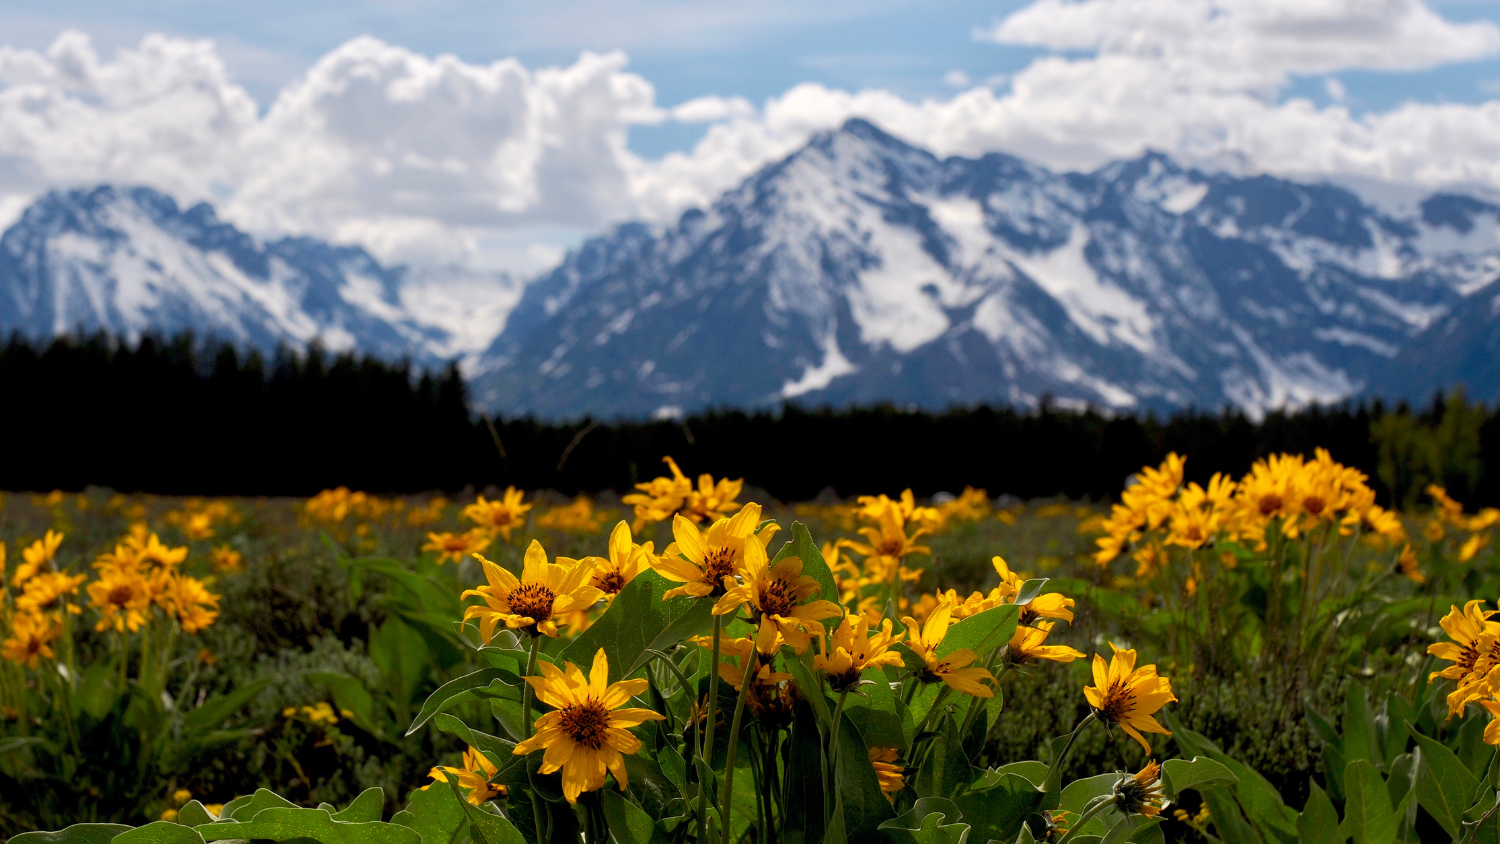 A view of flowers with a backdrop of snow covered mountains.